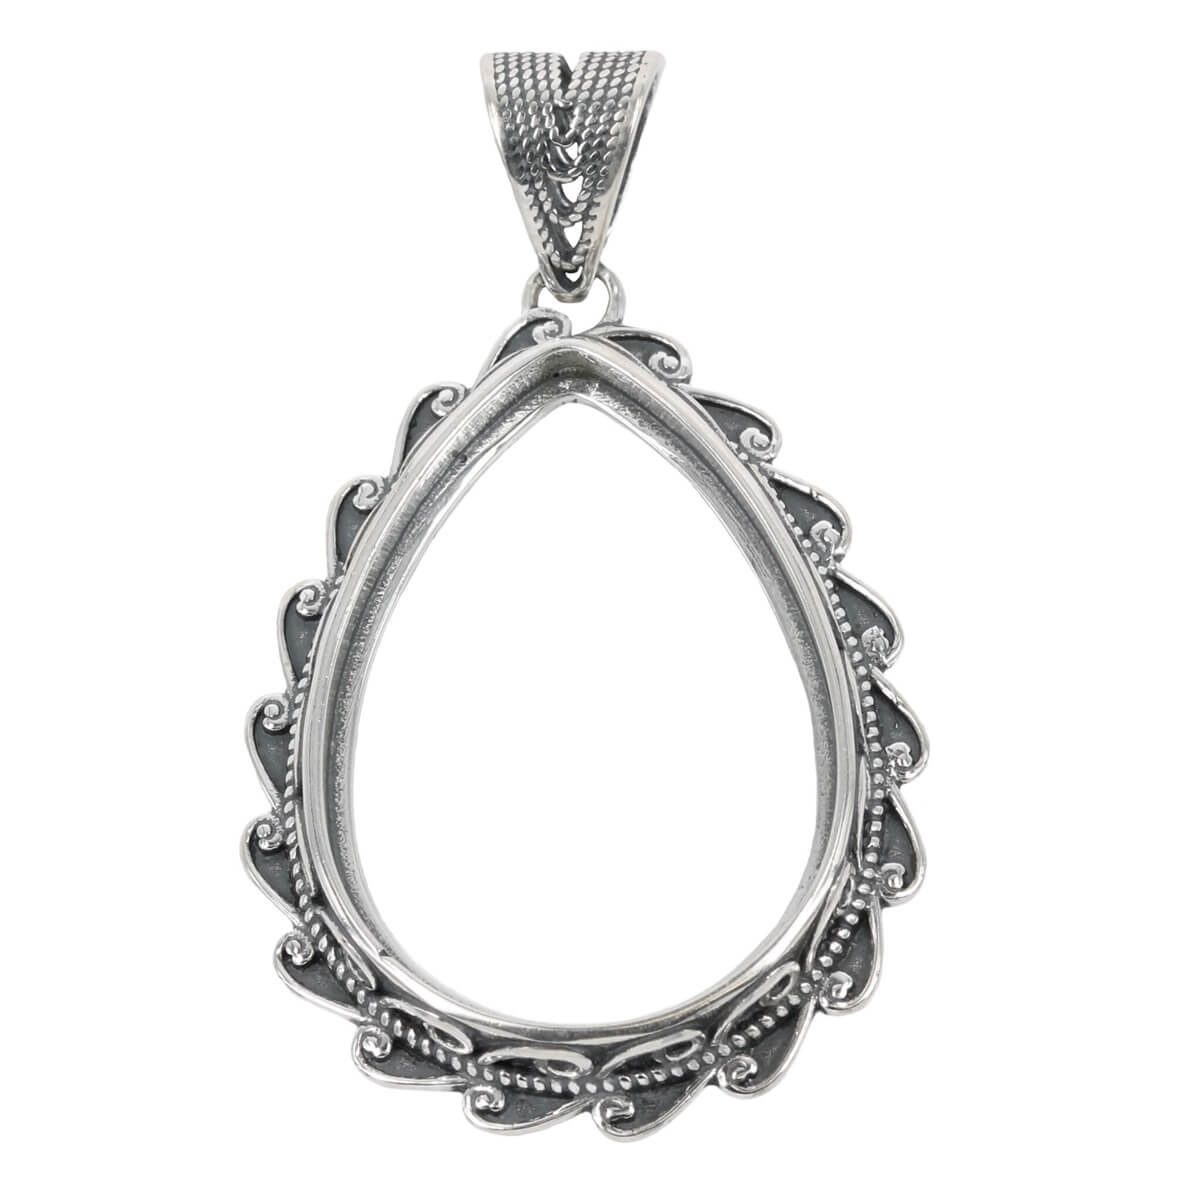 Curlicue Framed Pear Shaped Pendant with Soldered Loop and Bail in Sterling Silver for 22x31mm Stones 